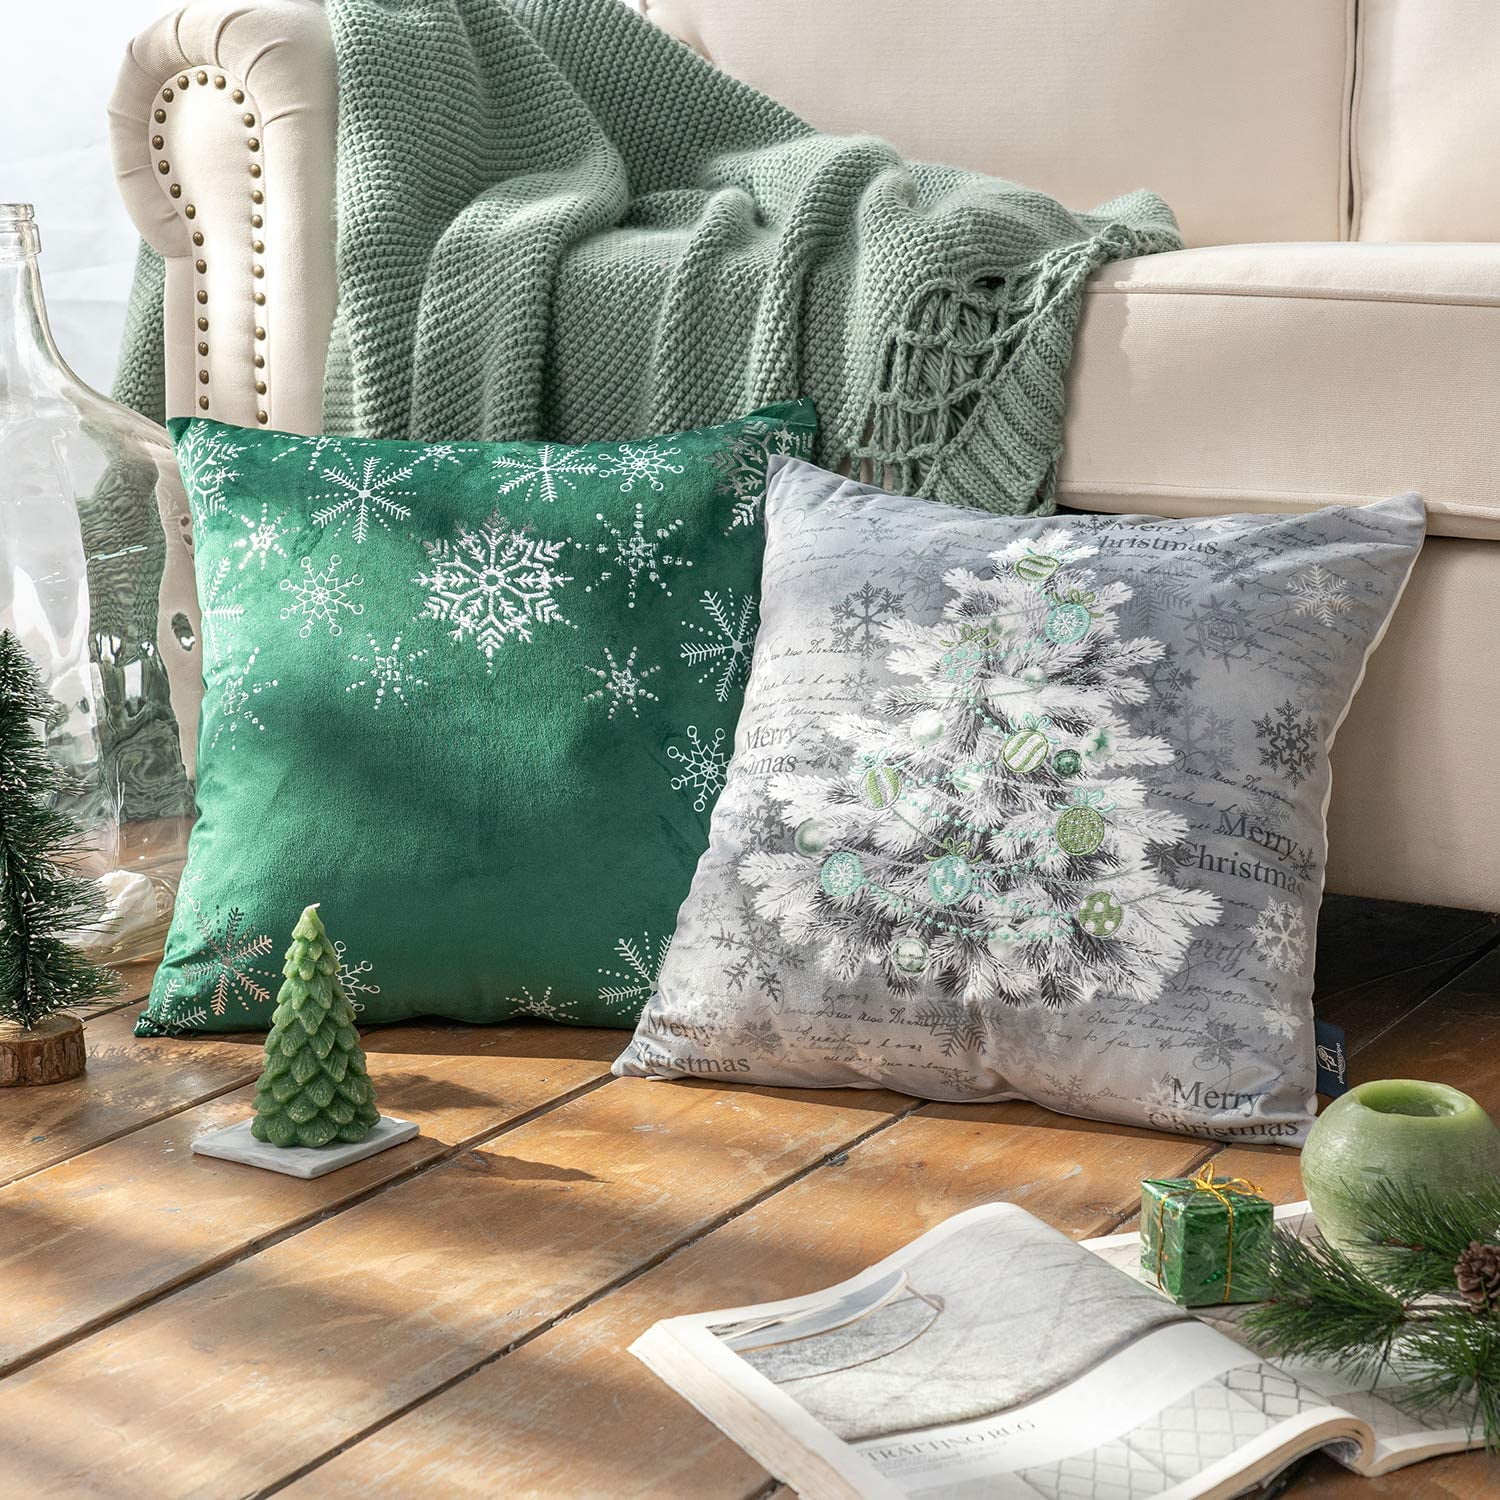 Embroidered Velevet Christmas Pillows, 45x45 cm and 30x50 cm - inserts not  included